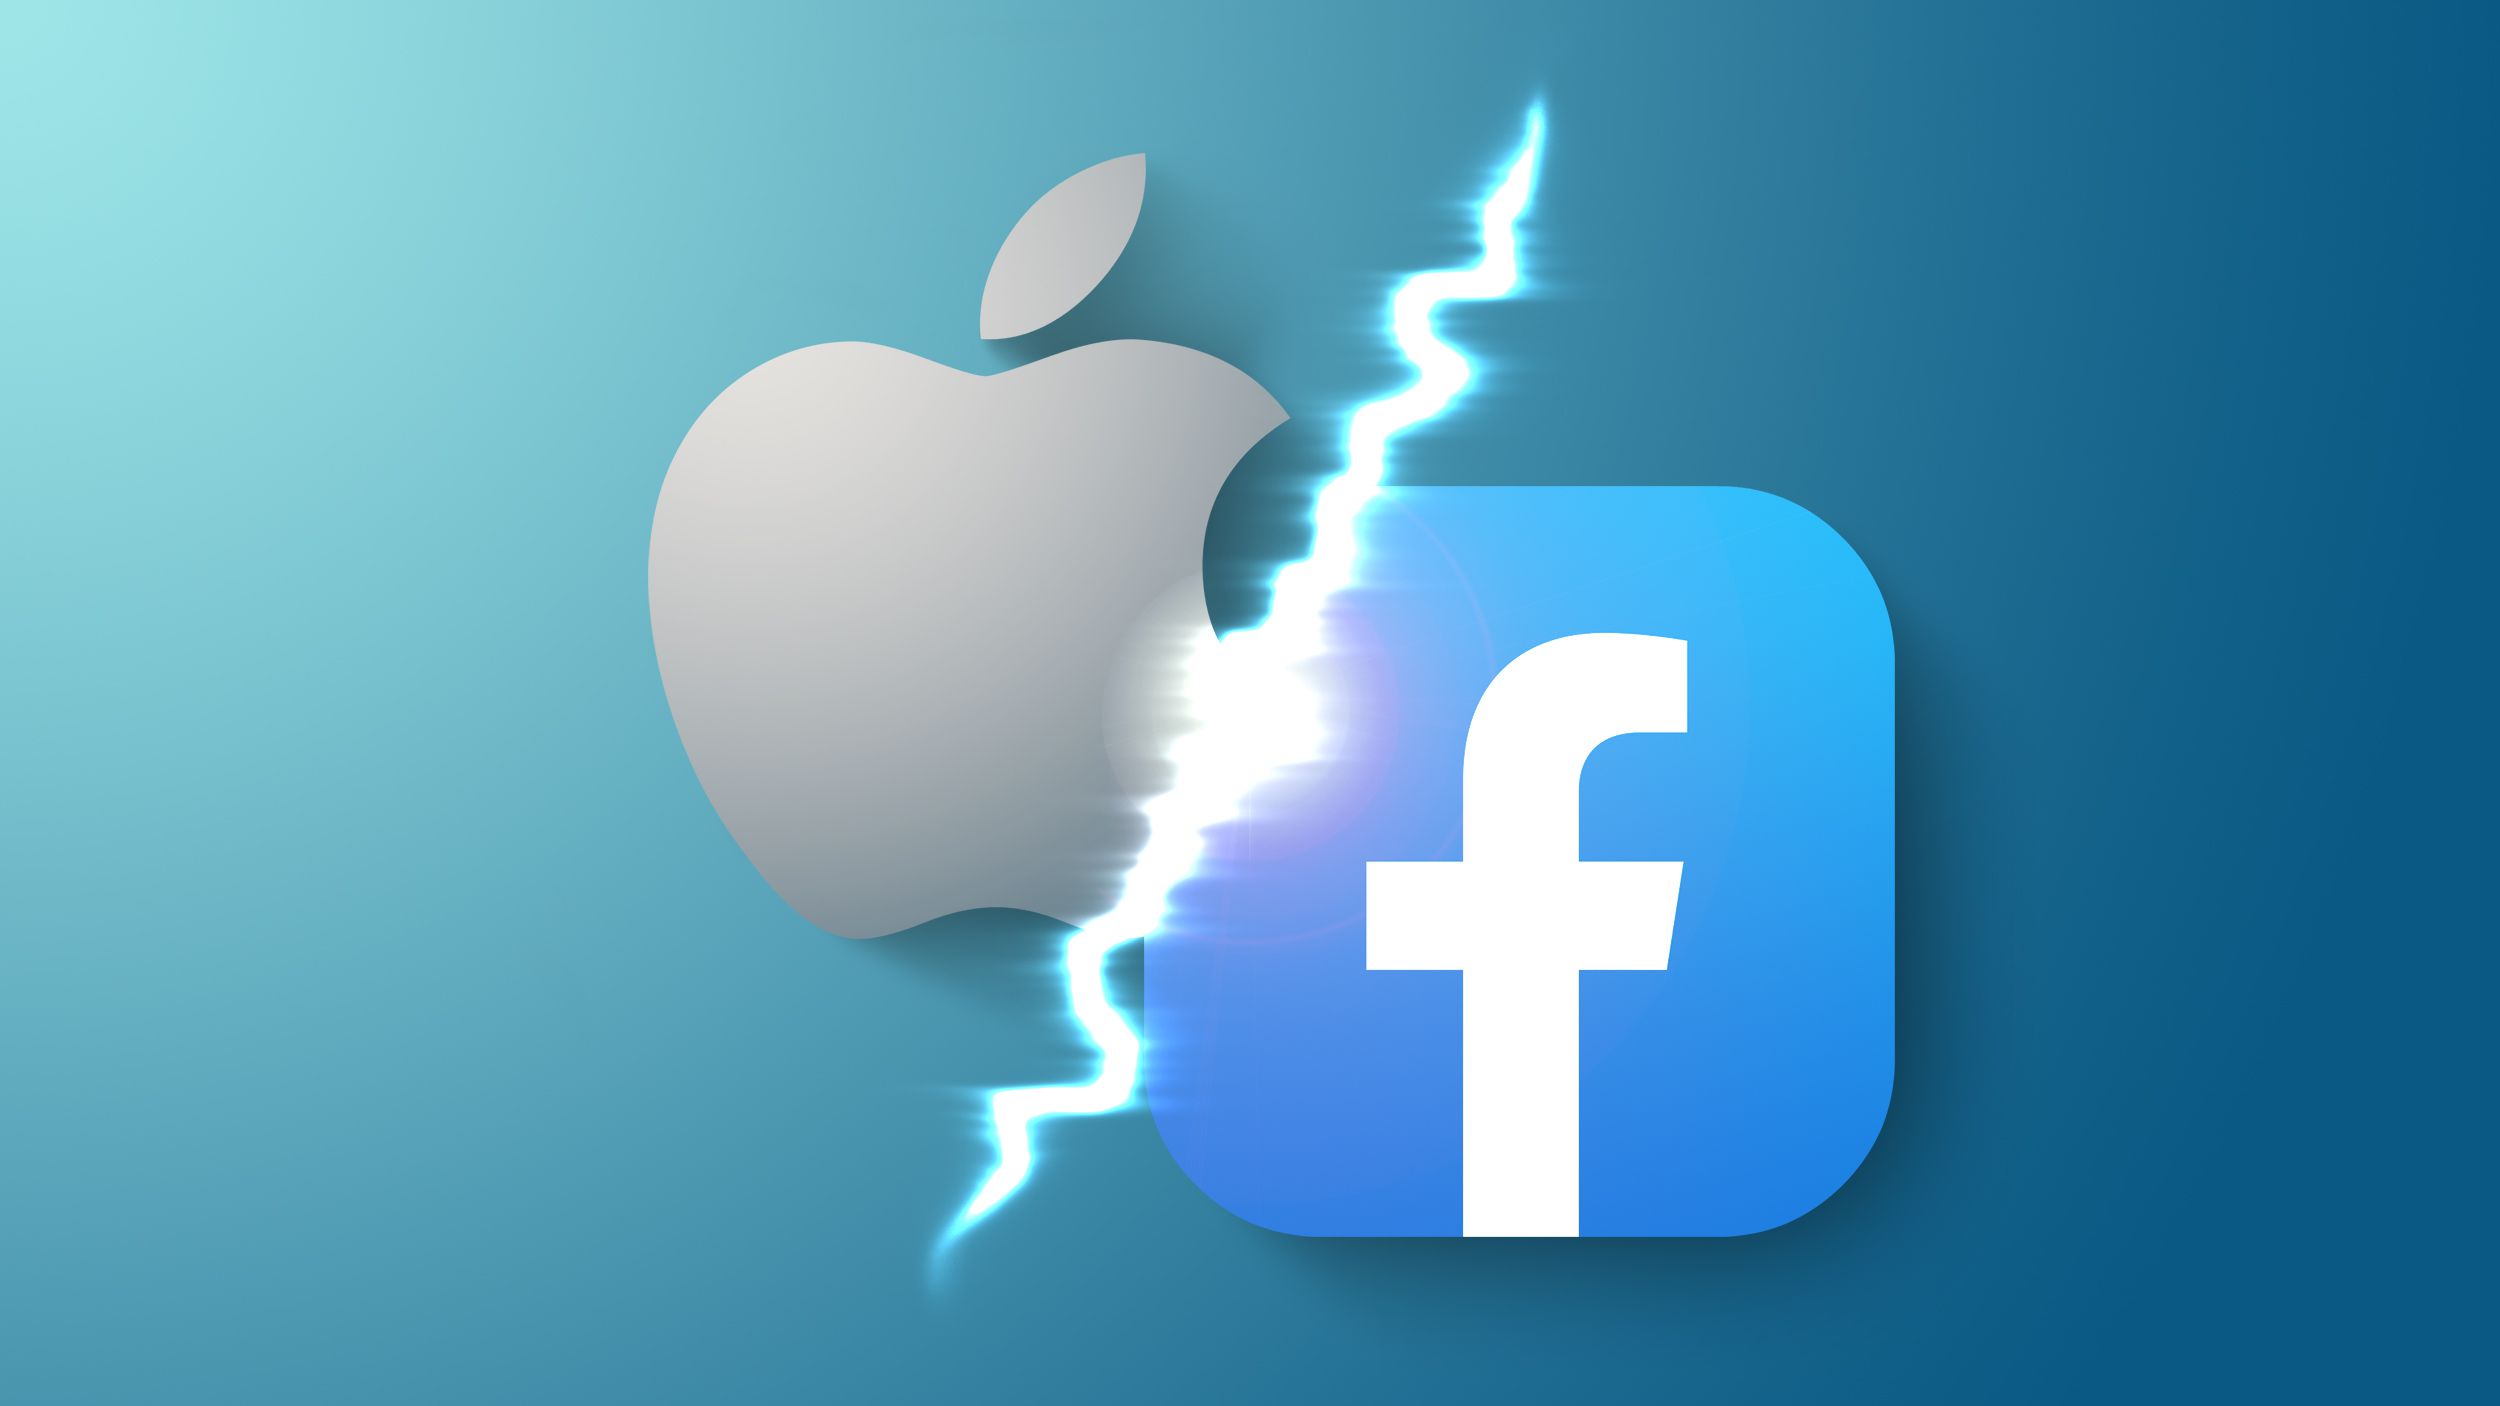 Apple-Facebook belligerent over iOS privacy update likely in spring